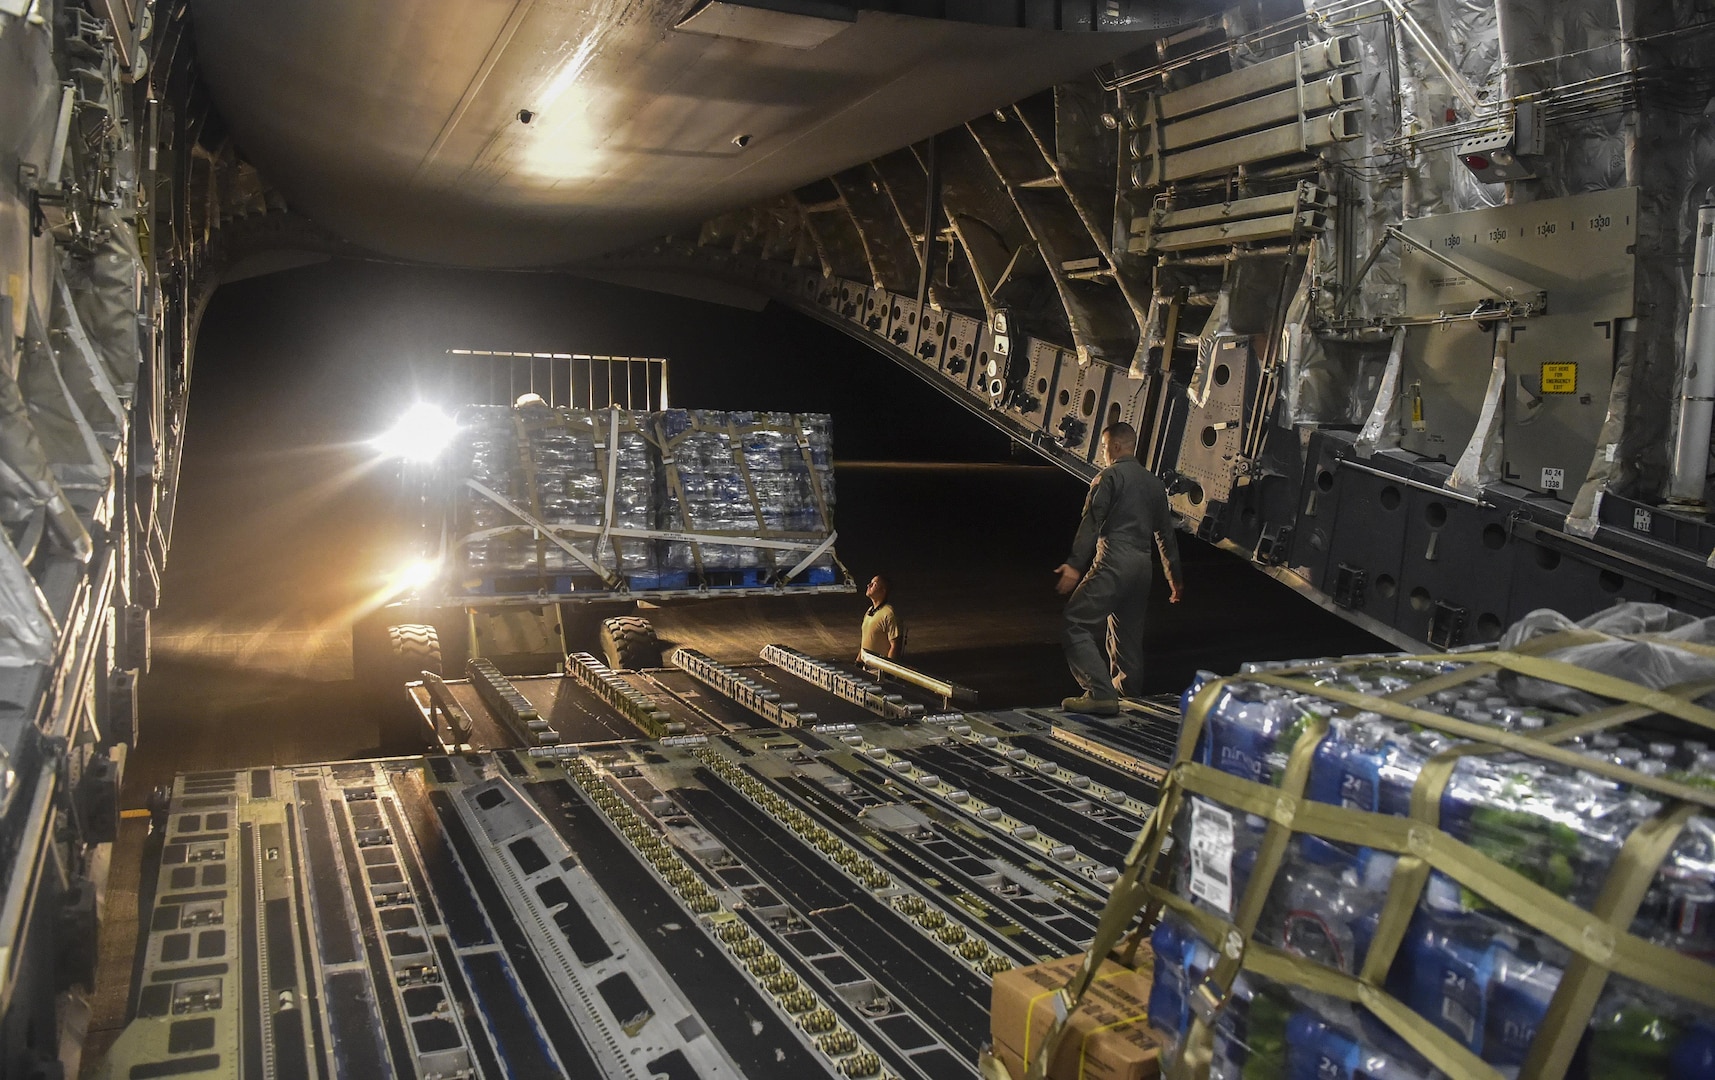 The inside of an aircraft with cases of water being loaded into the back.